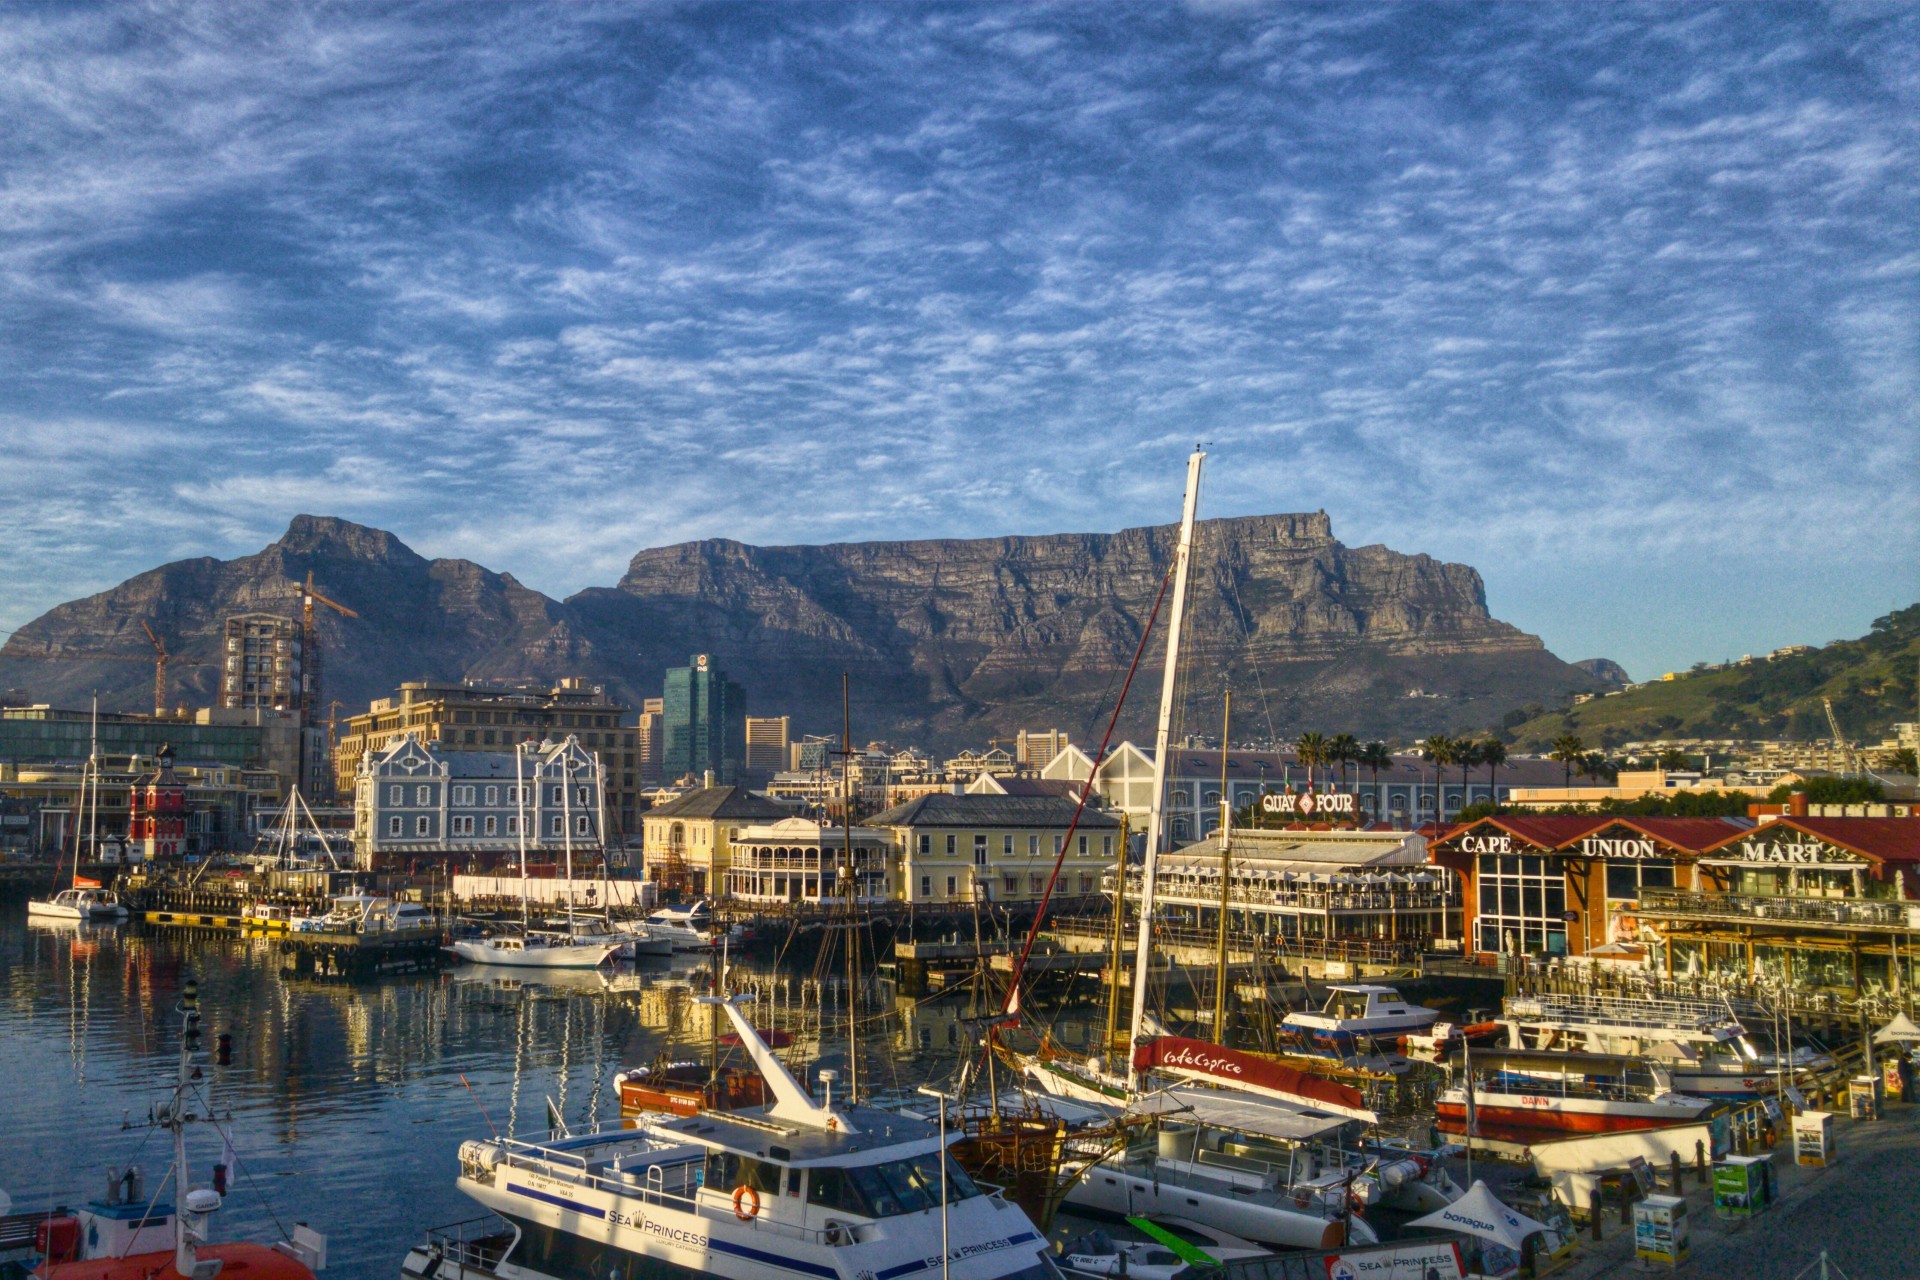 A scenic view of table mountain in Cape town, South Africa